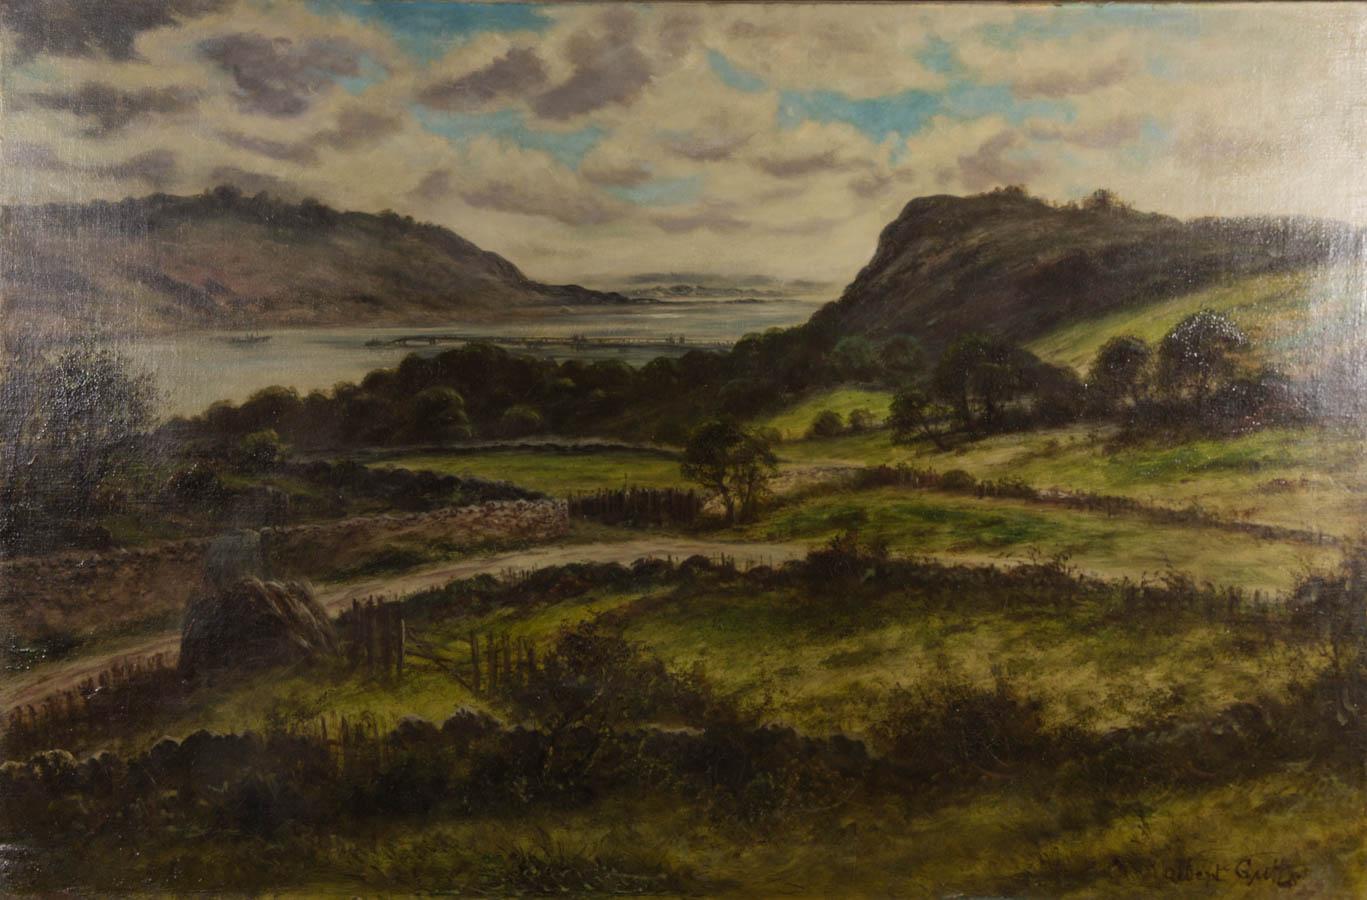 A finely composed landscape depicting lush green hills and a large estuary in the distance. A lone boat makes its way to the dock and grey clouds gather overhead. Signed to the lower right. On canvas, laid to canvas on stretchers.
